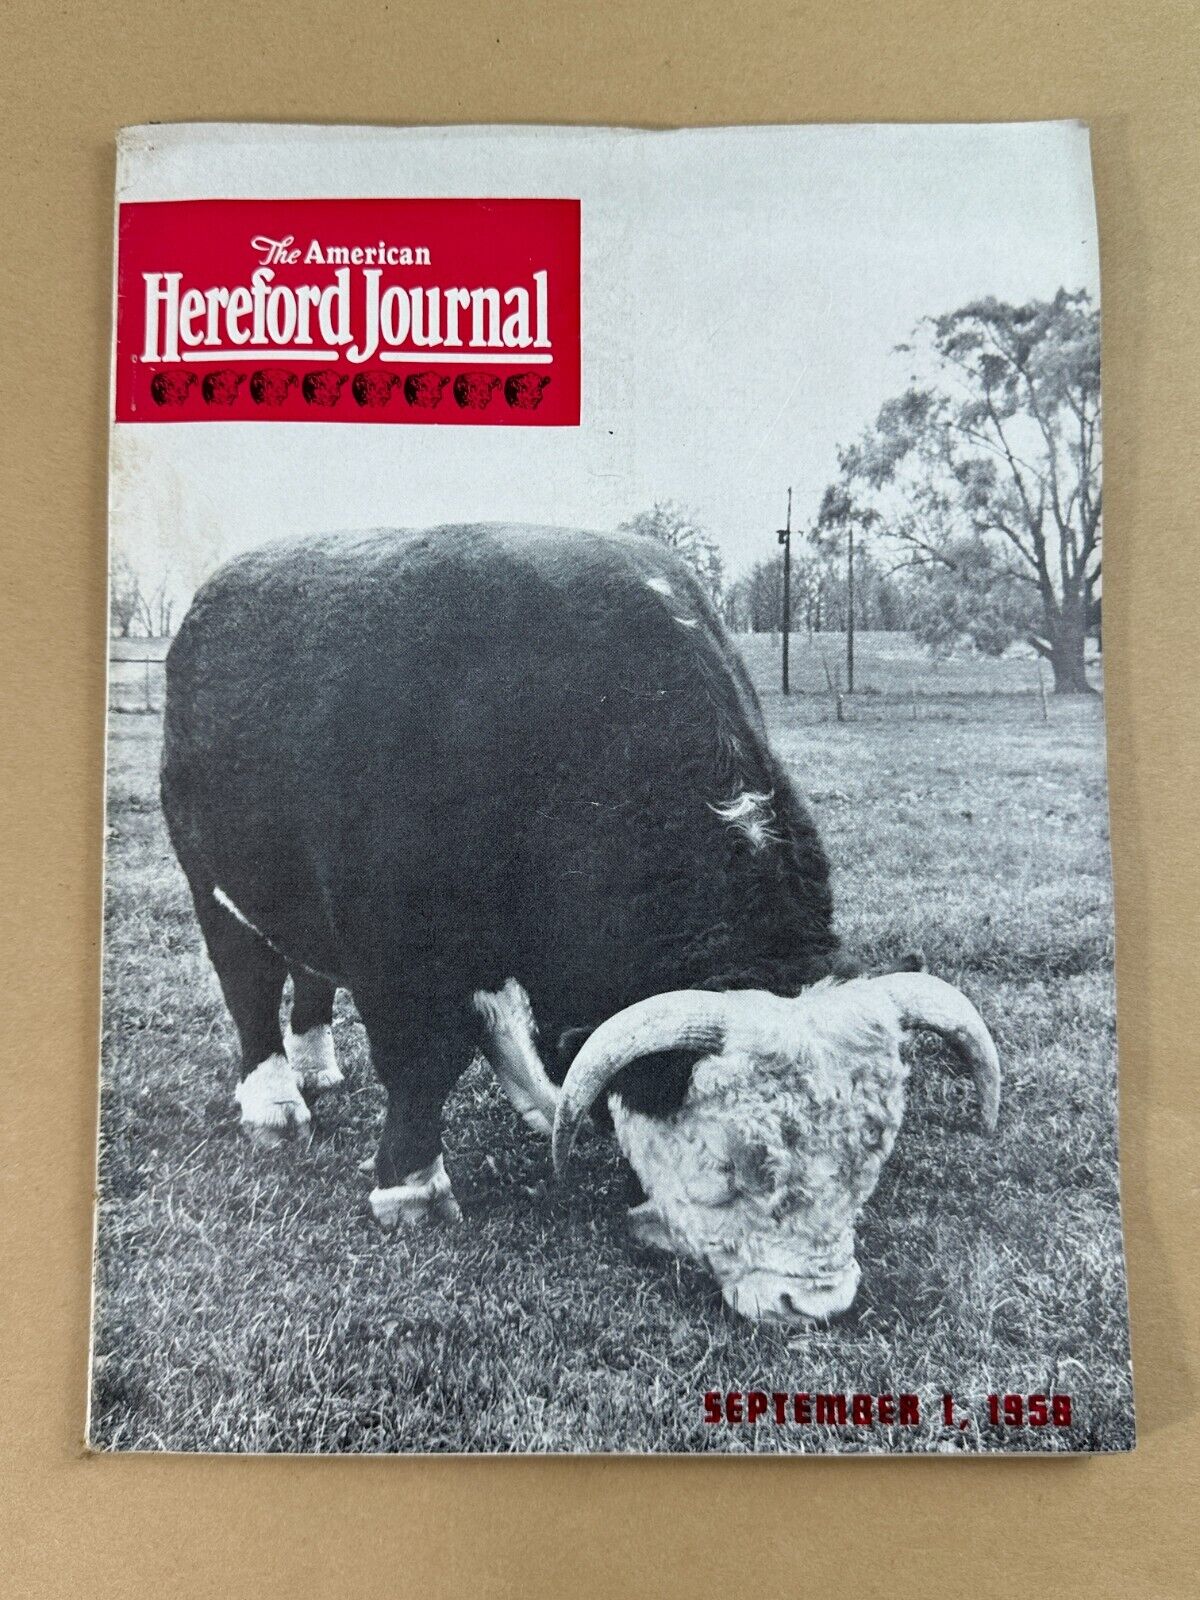 September 1, 1958 American Hereford Journal magazine - ads, articles, photos